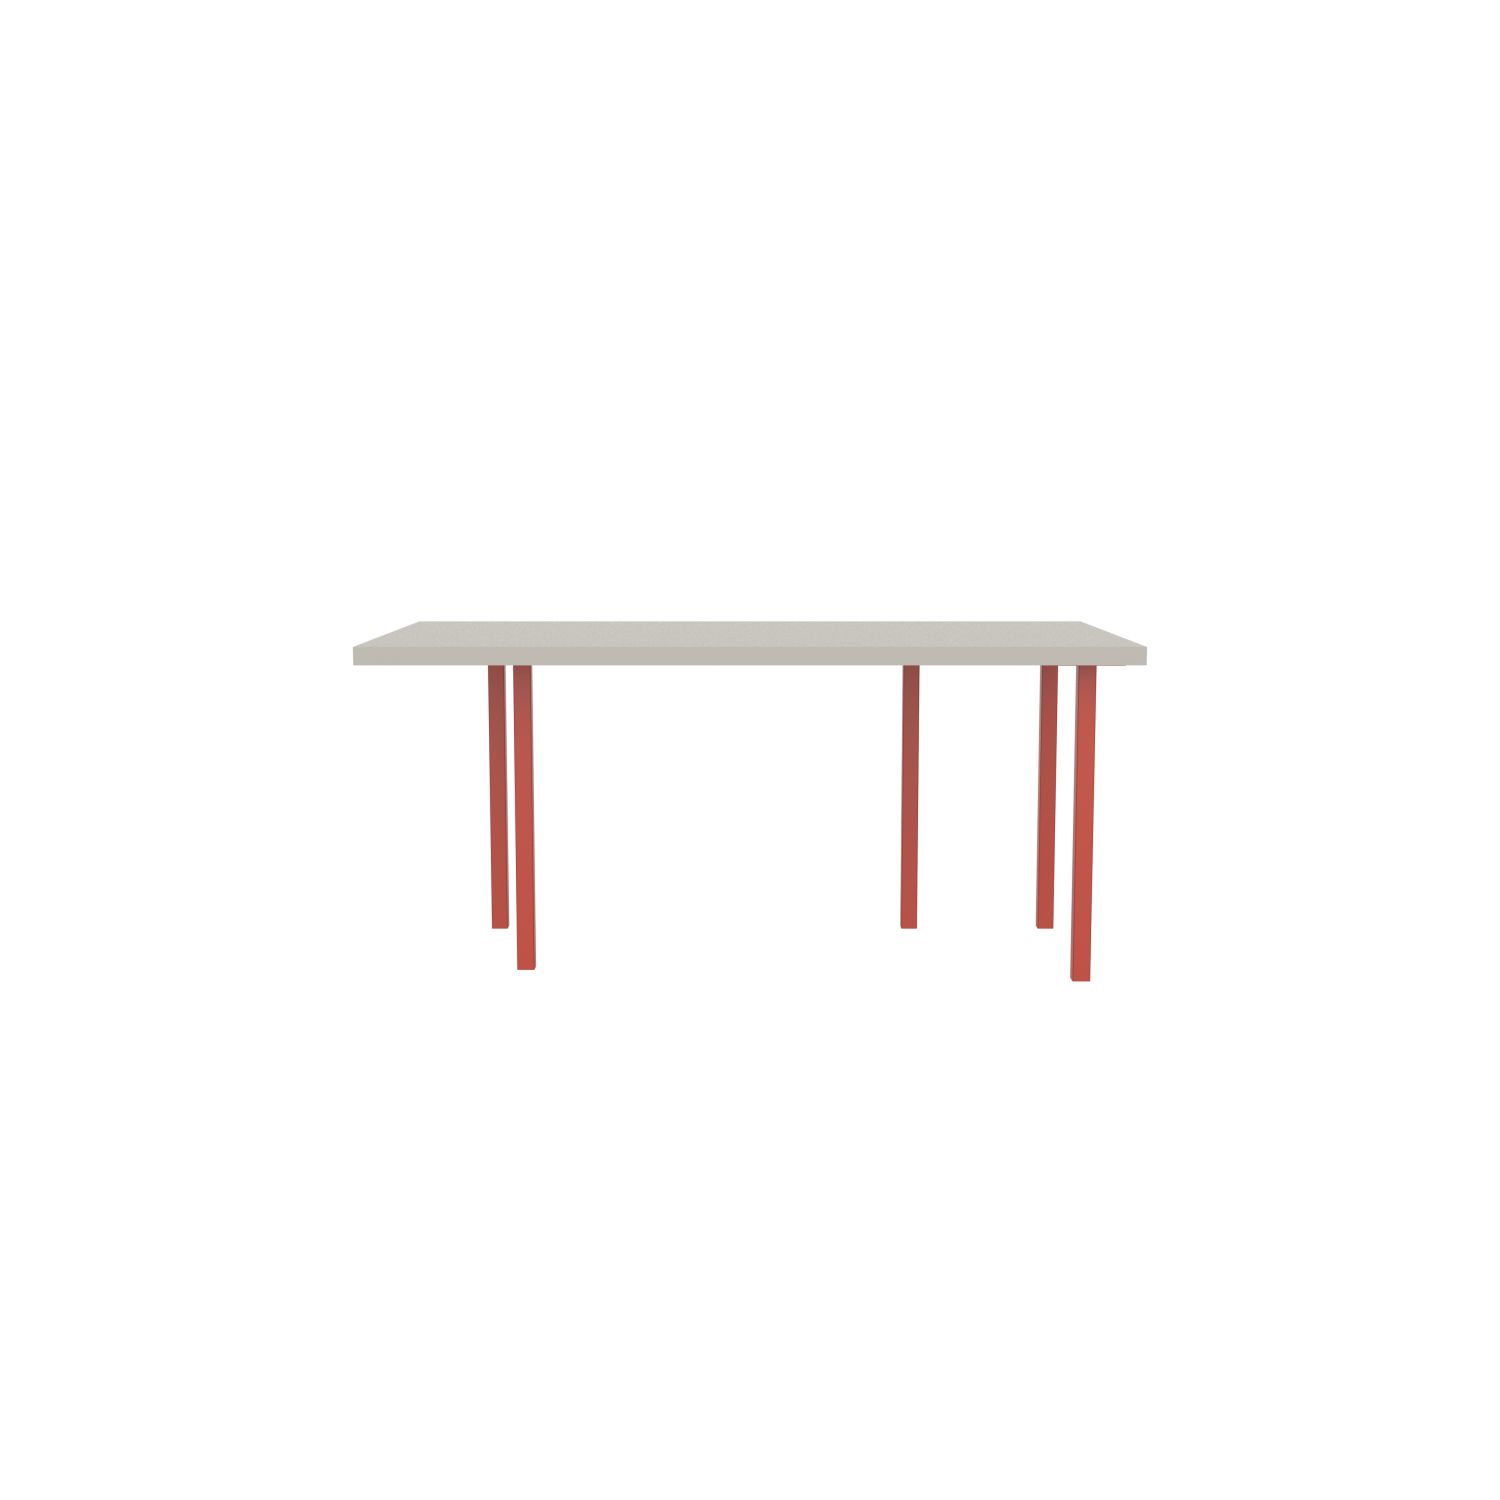 lensvelt bbrand table five fixed heigt 915x172 hpl white 50 mm price level 1 vermilion red ral2002